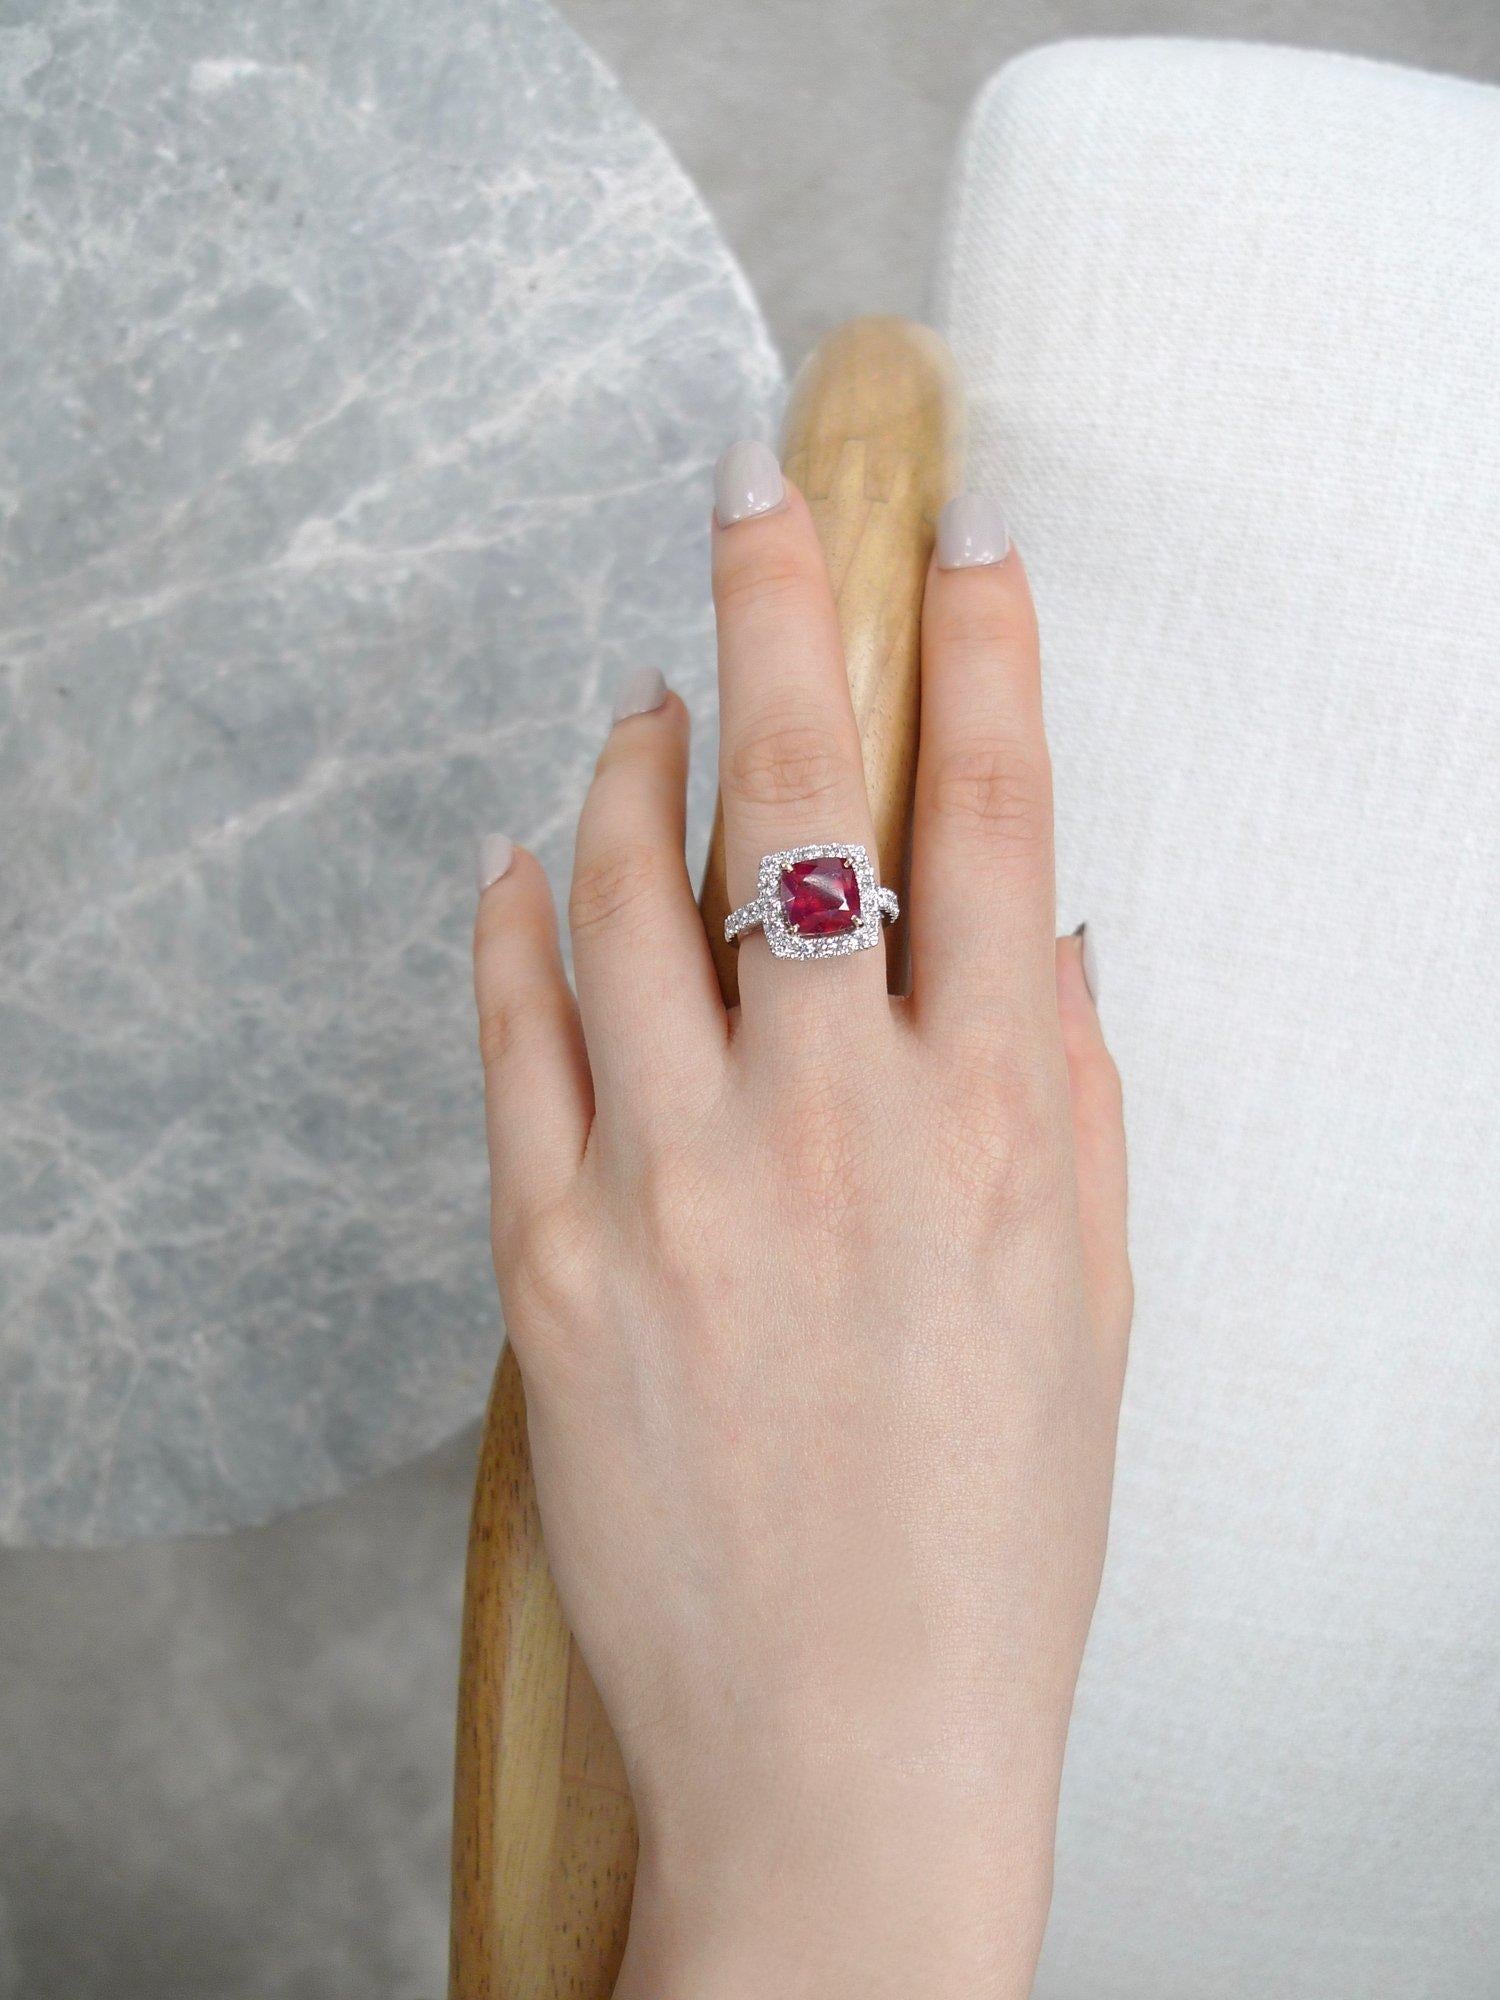 For Sale:  Mozambique Pigeon Blood Cushion Cut Ruby Halo Diamond Engagement Ring 2